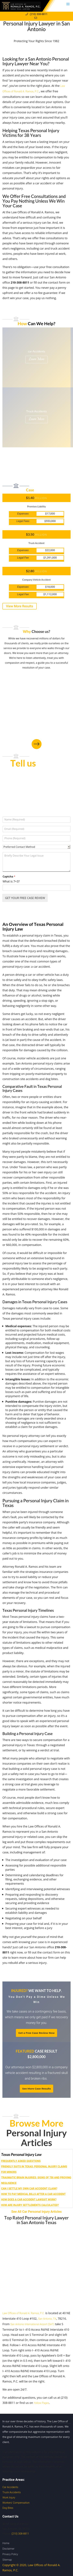 Law Offices of Ronald A. Ramos, P.C. - San Antonio TX Lawyers